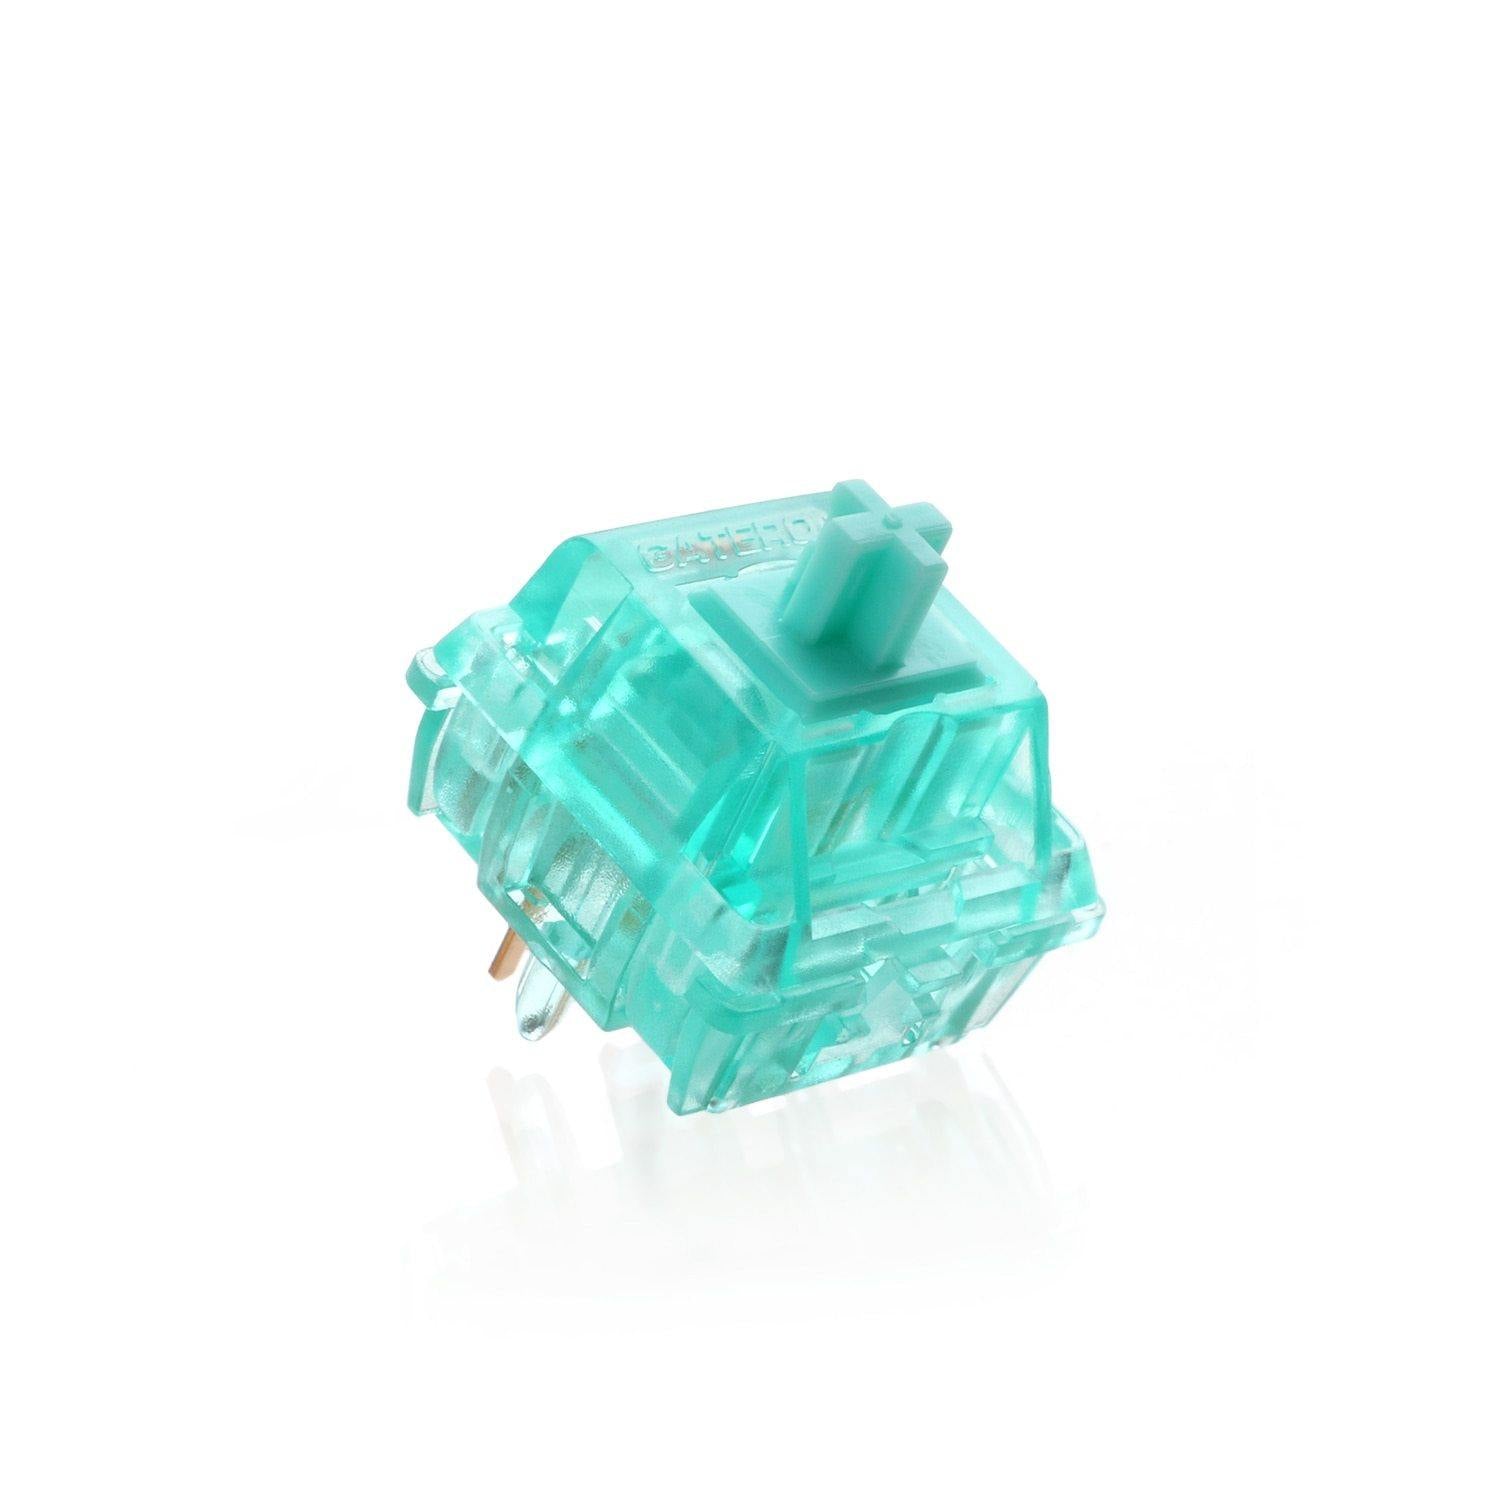 TURQUOISE TEALIO LINEAR SWITCHES - THE KEYCAP CLUB